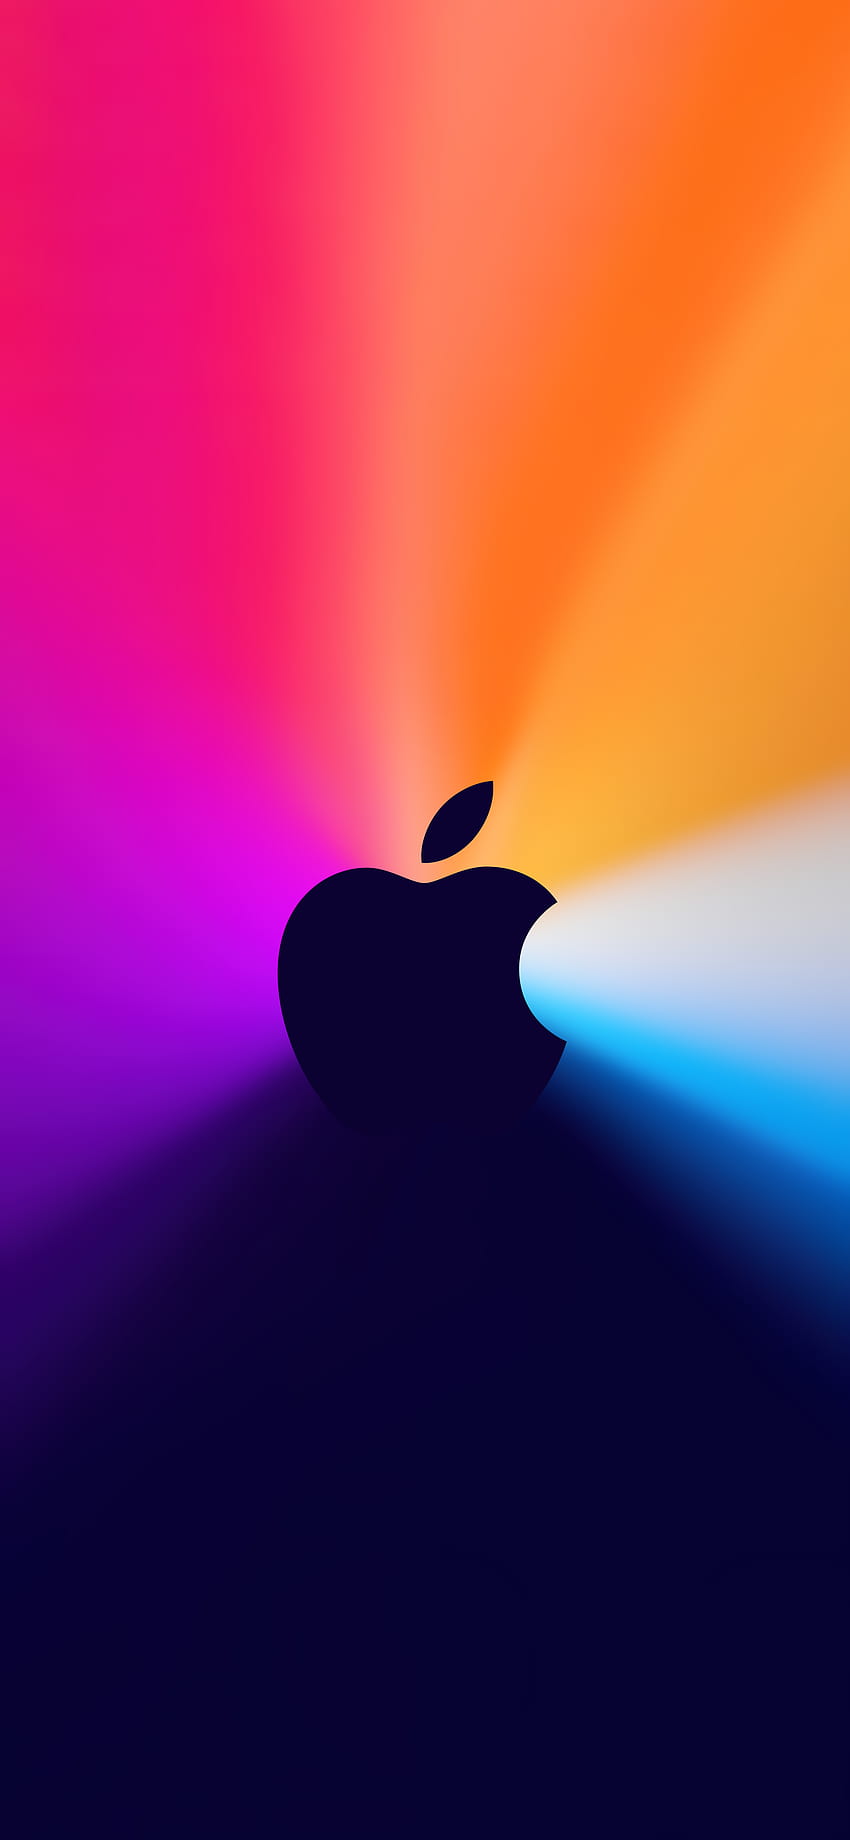 One more thing” event, 11 Apple Logo HD phone wallpaper | Pxfuel